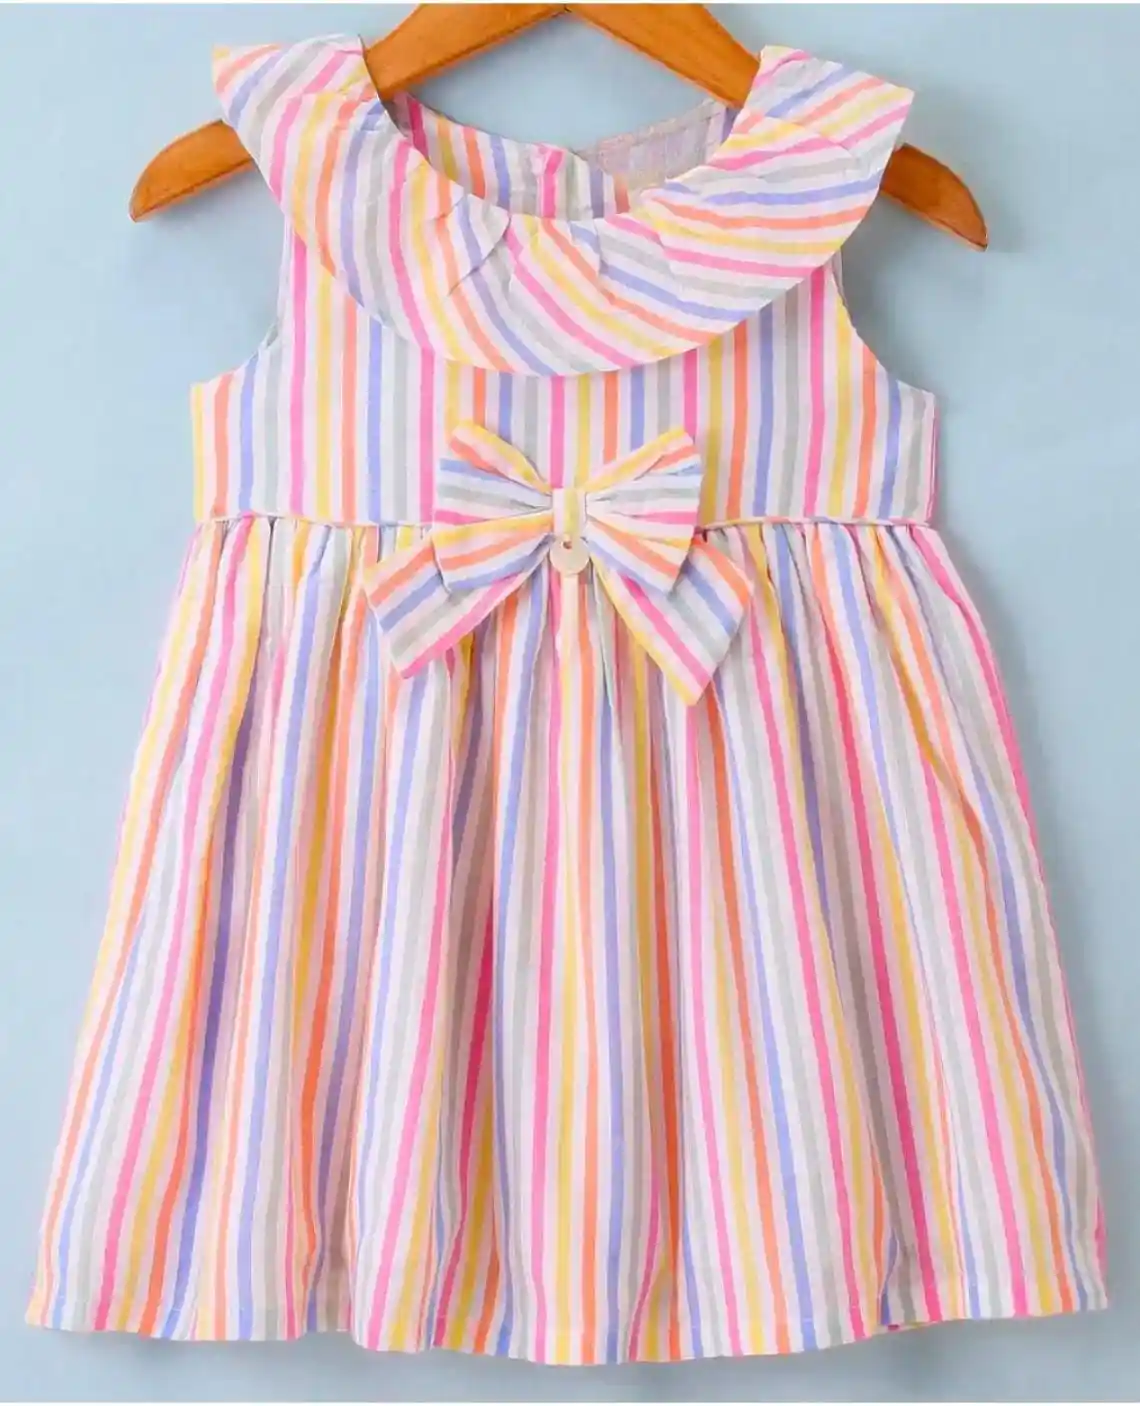 100% Cotton Knit Sleeveless Frock with Striped Pattern & Bow Applique - Multicolour